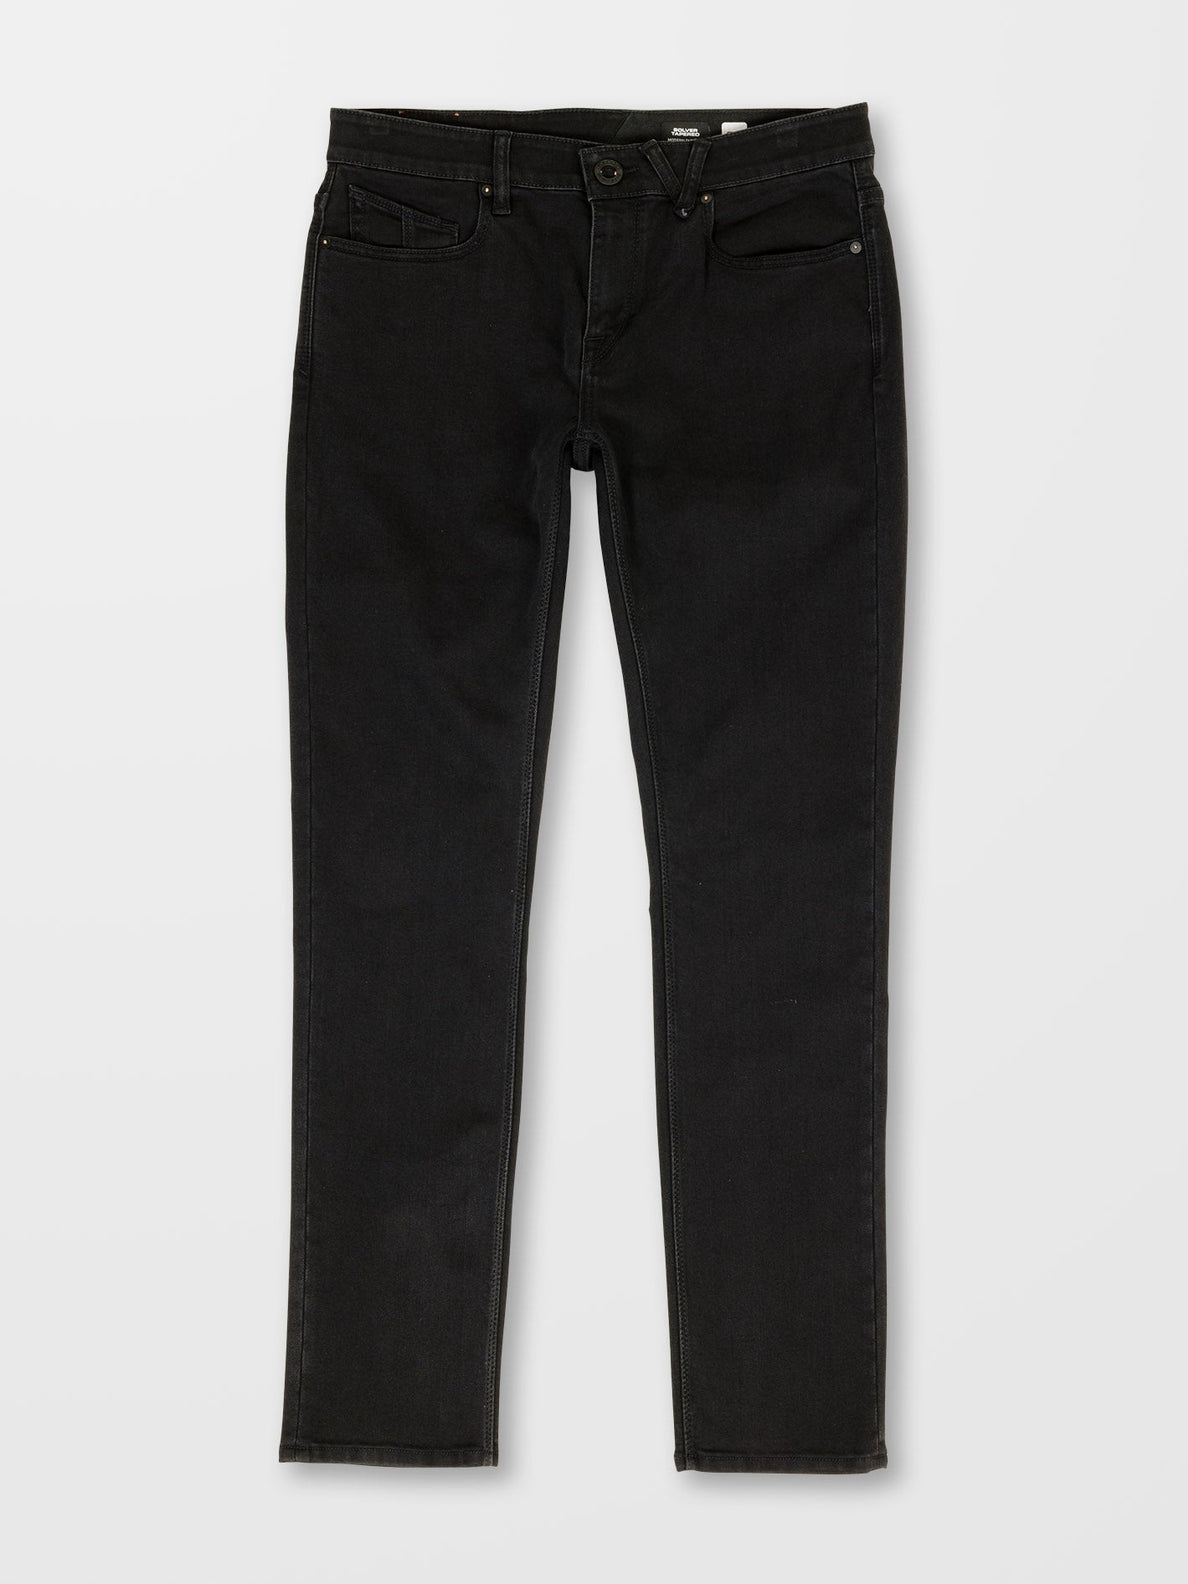 Solver Tapered Jeans - BLACK OUT (A1932201_BKO) [1]